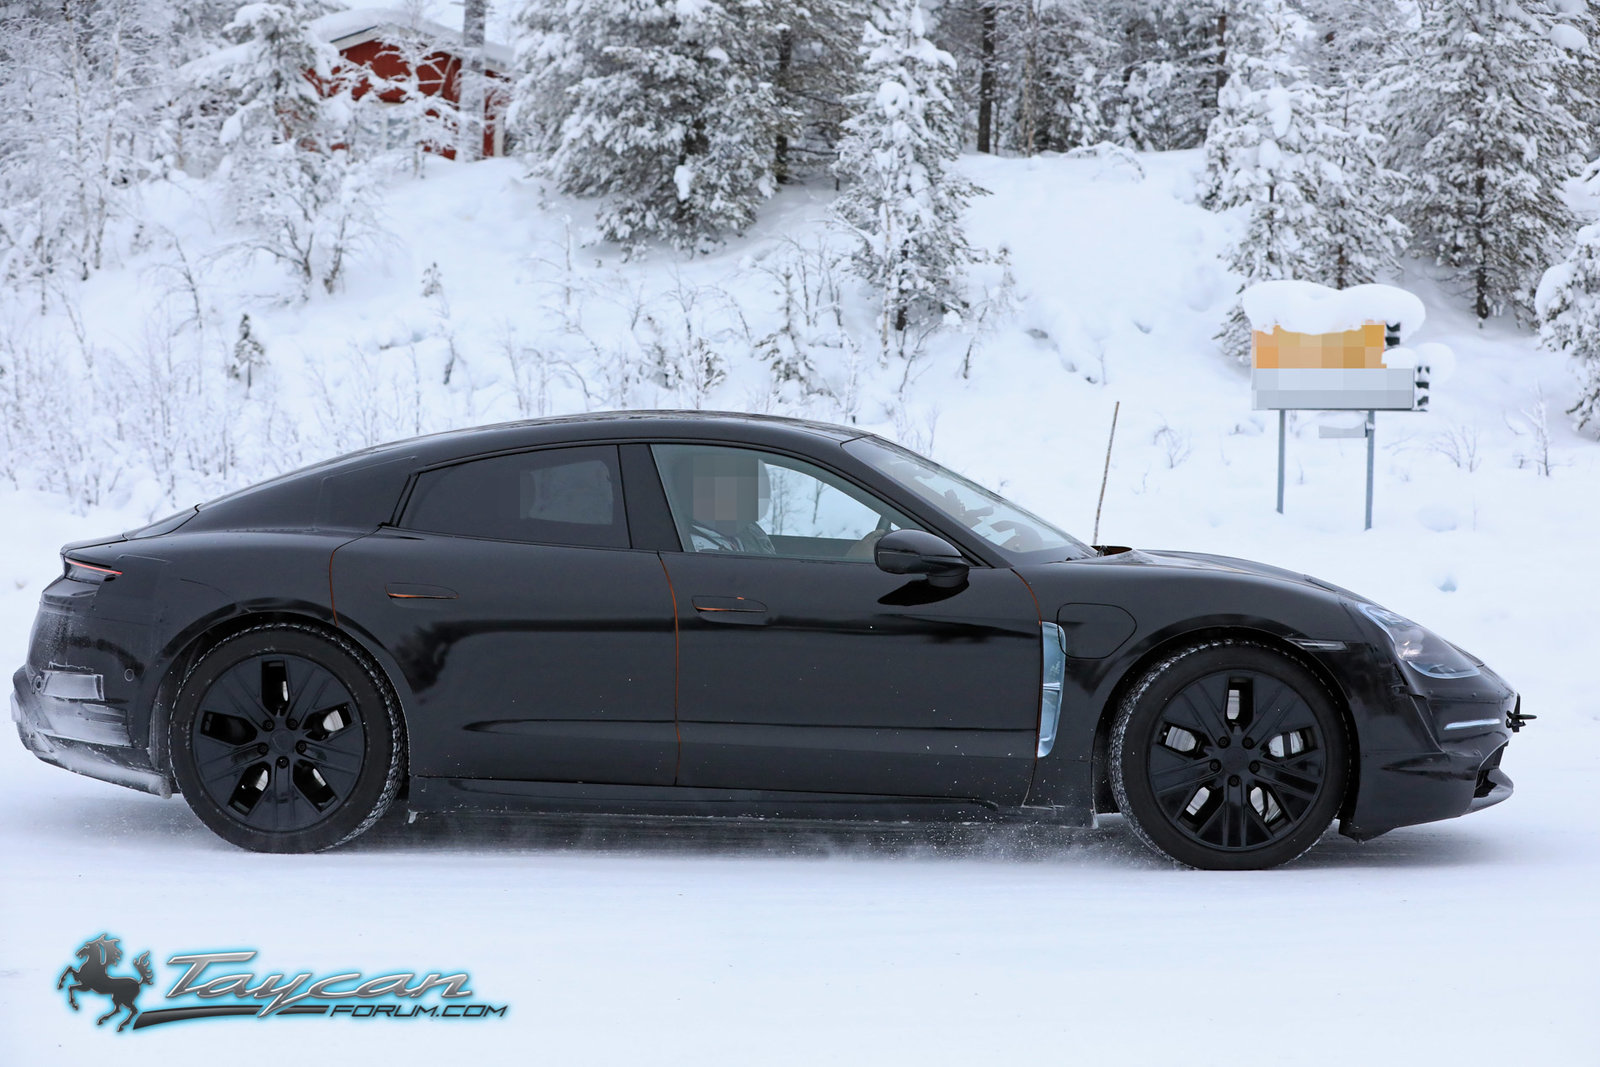 Porsche Taycan Most detailed Taycan spy pics yet, with first look at carbon ceramic brakes Porsche-Taycan-Prototype-_SB18020